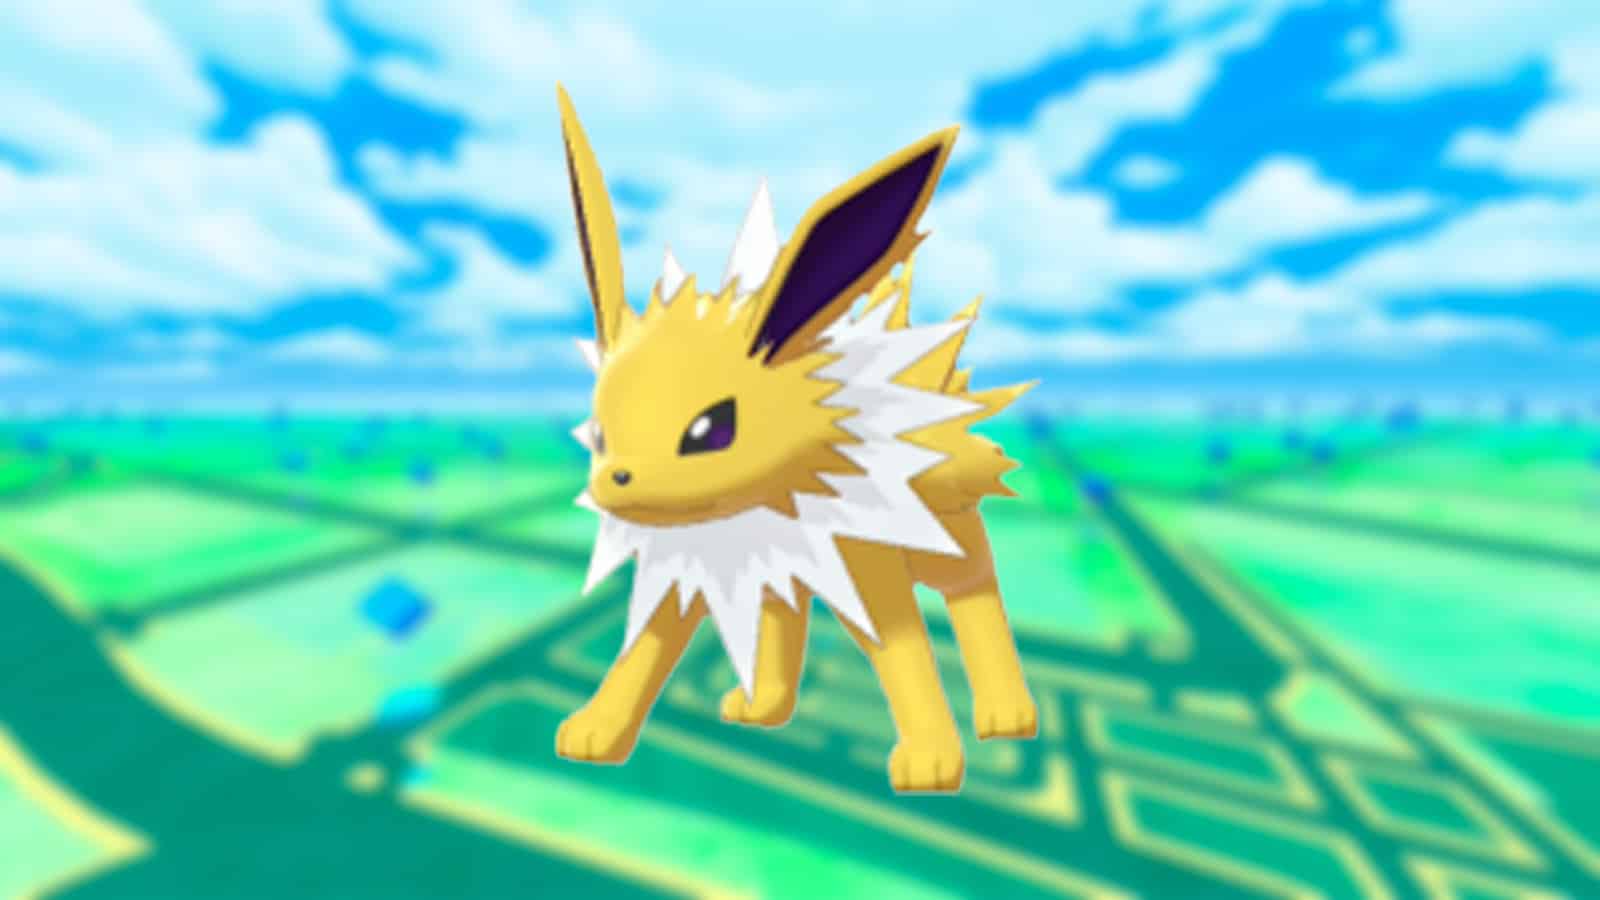 An image of Jolteon in Pokemon Go